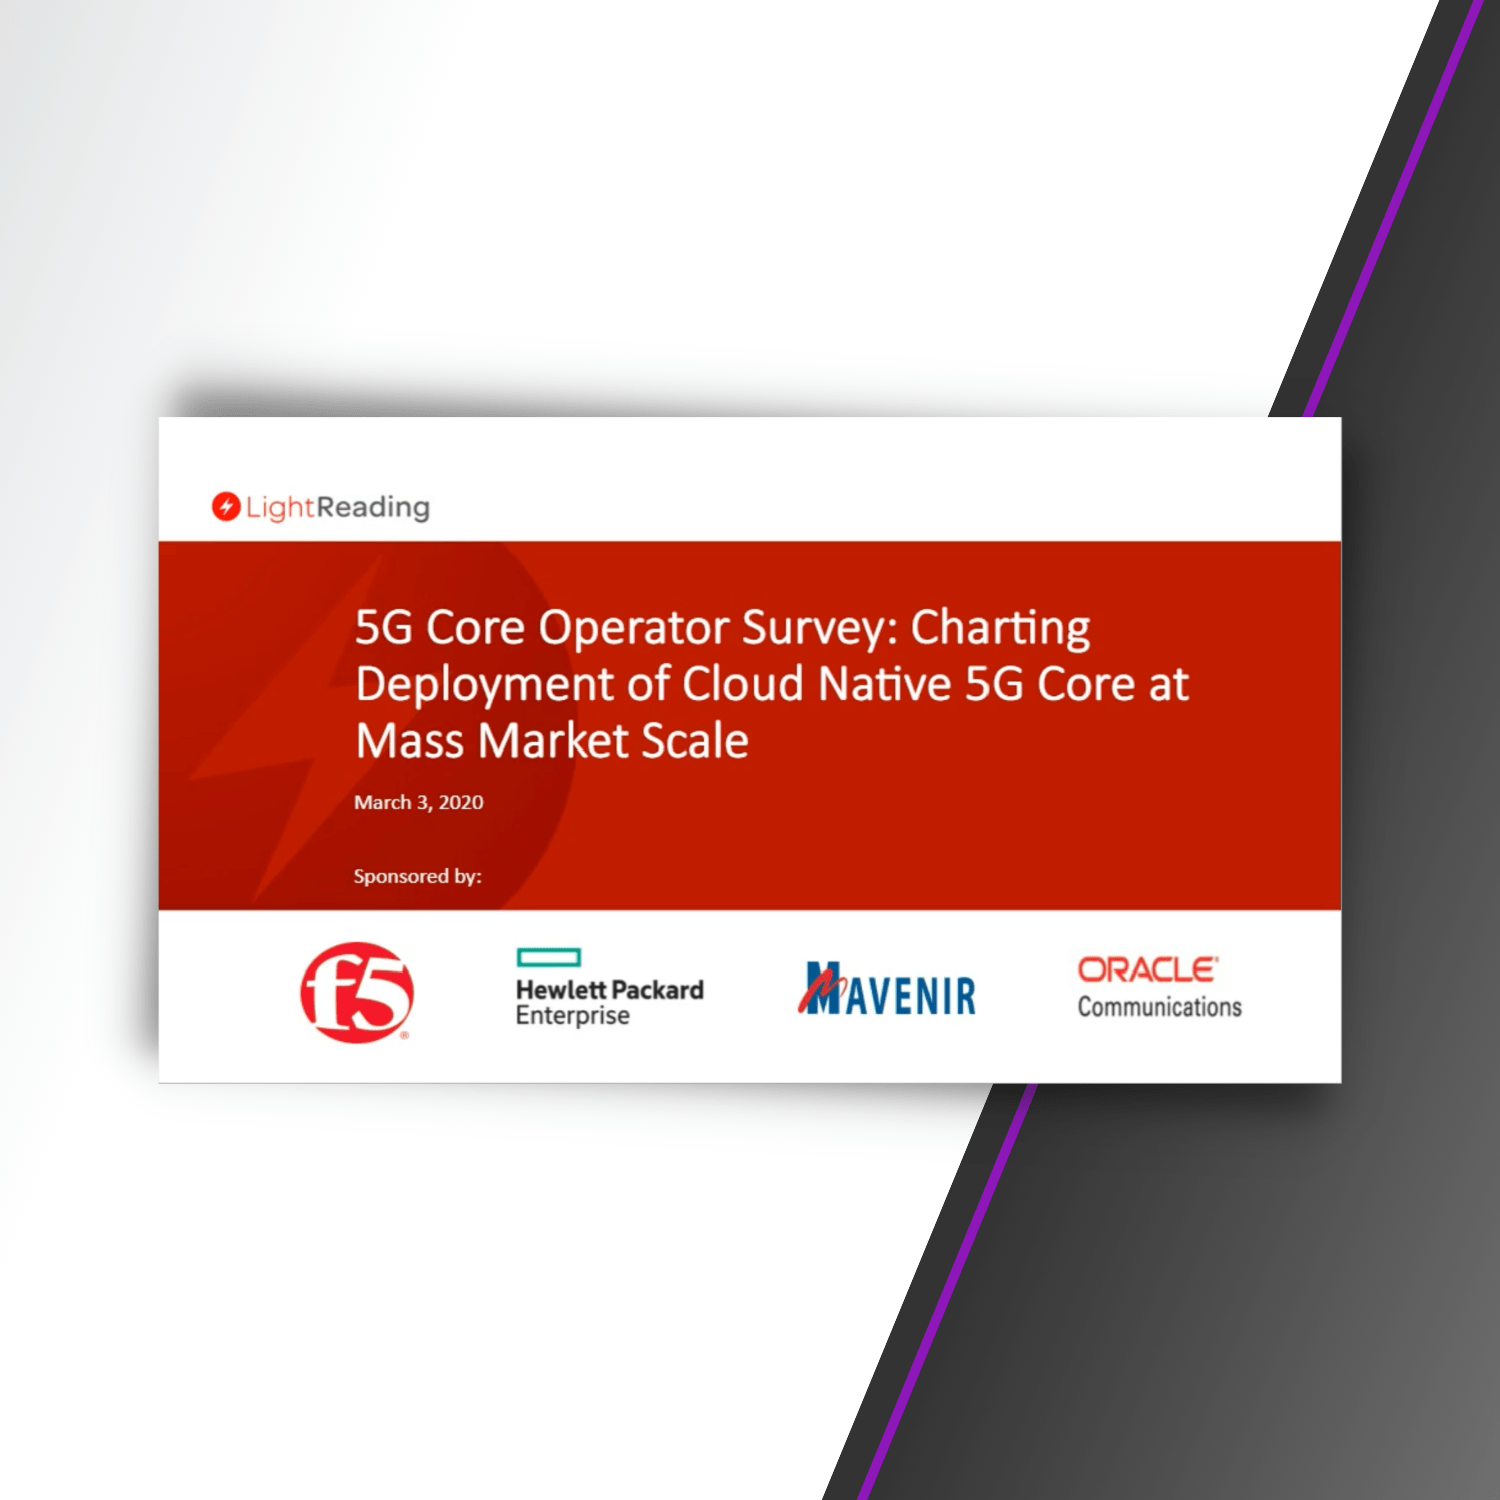 5G Core Operator Survey: Charting Deployment of Cloud-Native 5G Core at Mass Market Scale